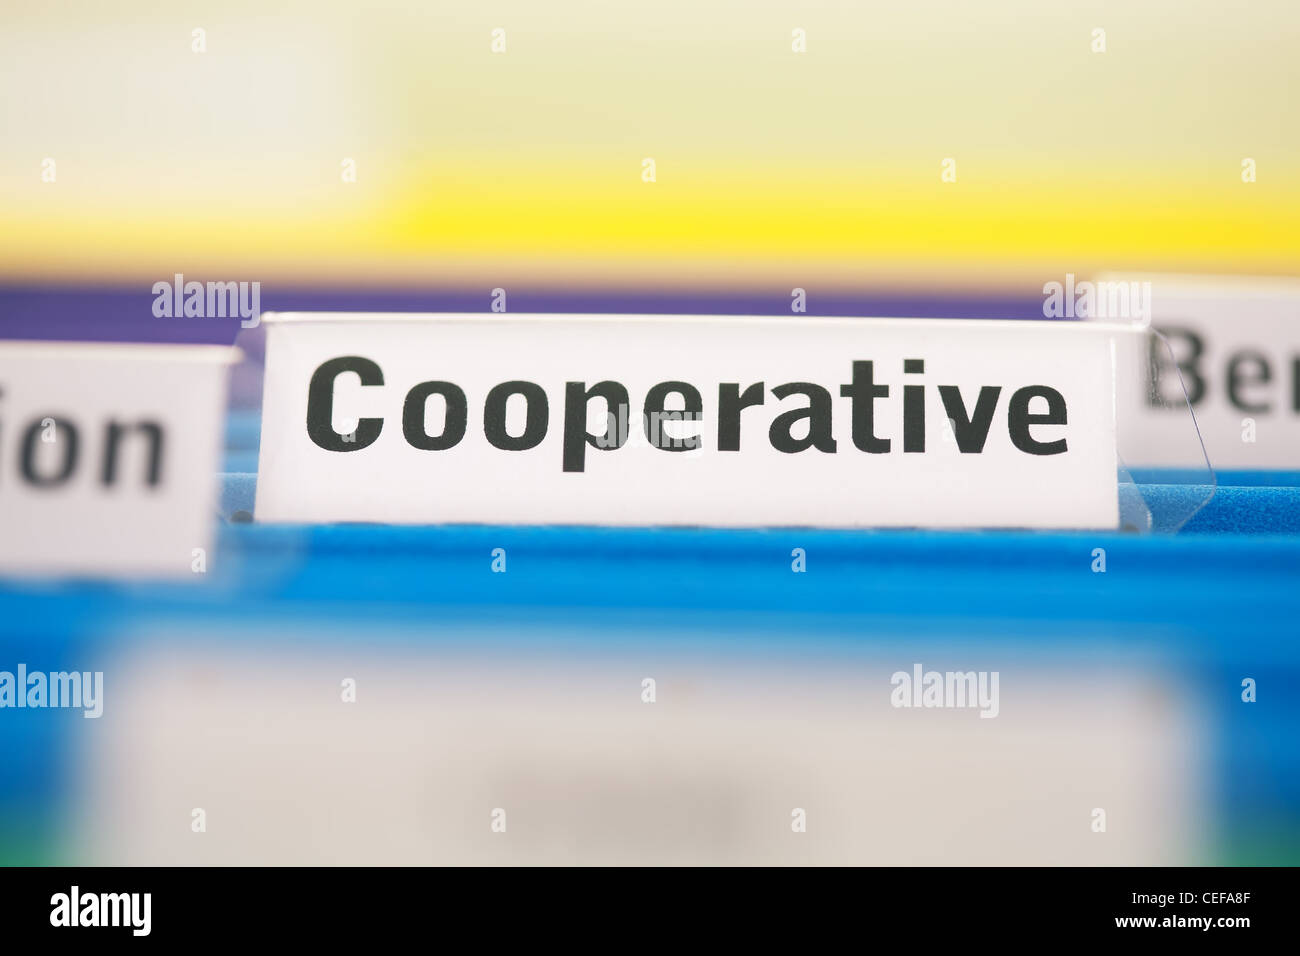 Cooperative business organization filed in blue folders Stock Photo